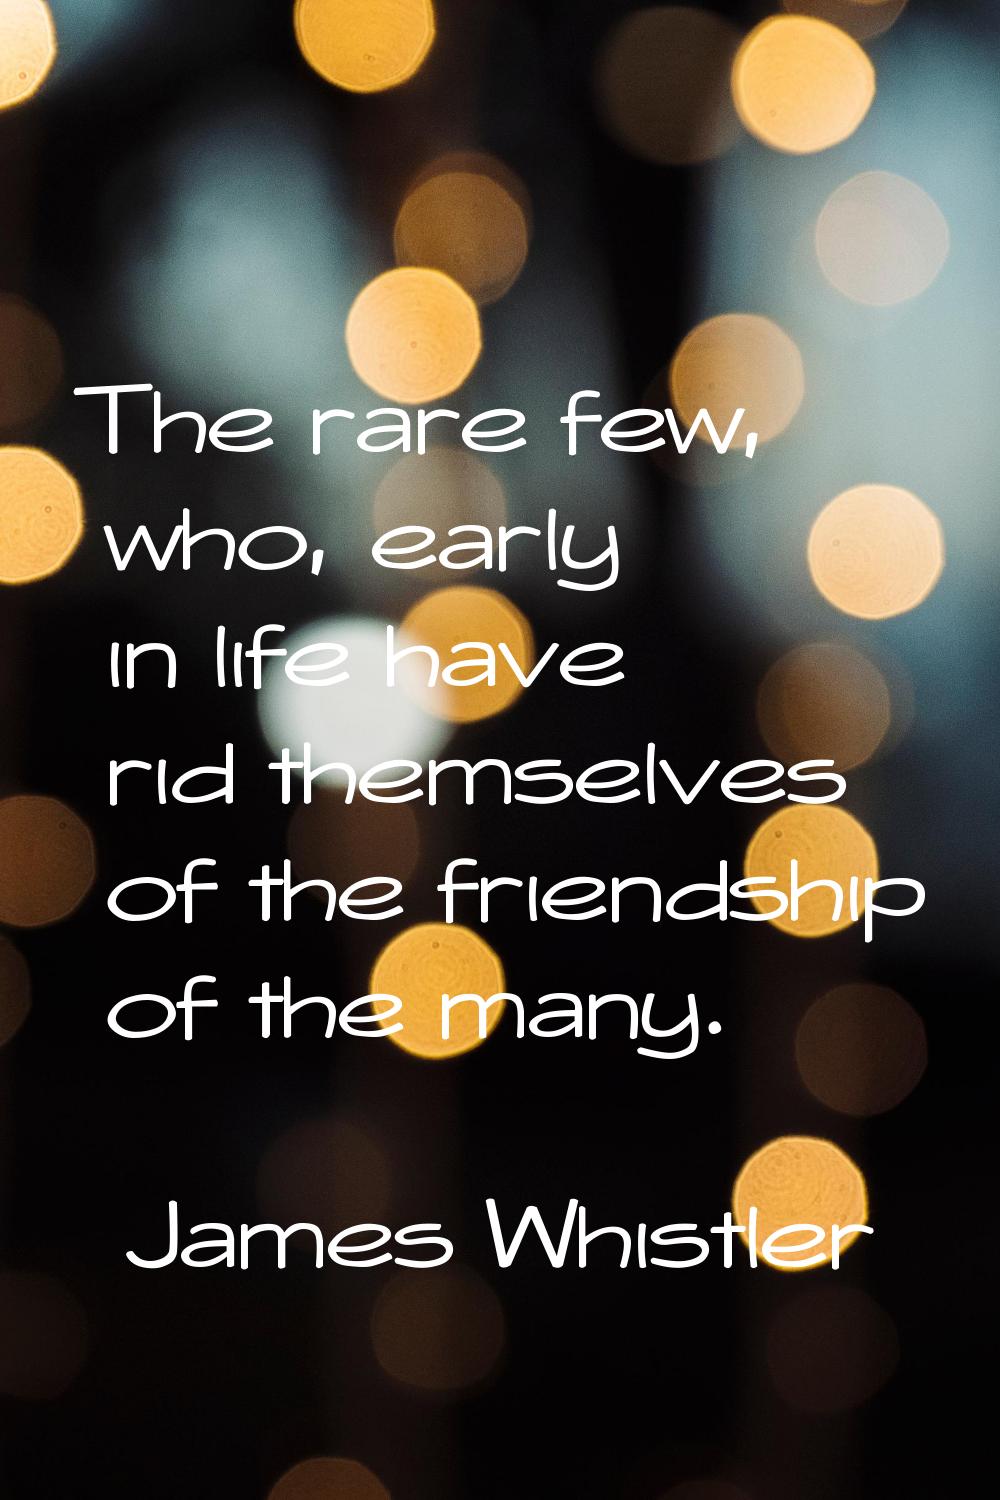 The rare few, who, early in life have rid themselves of the friendship of the many.